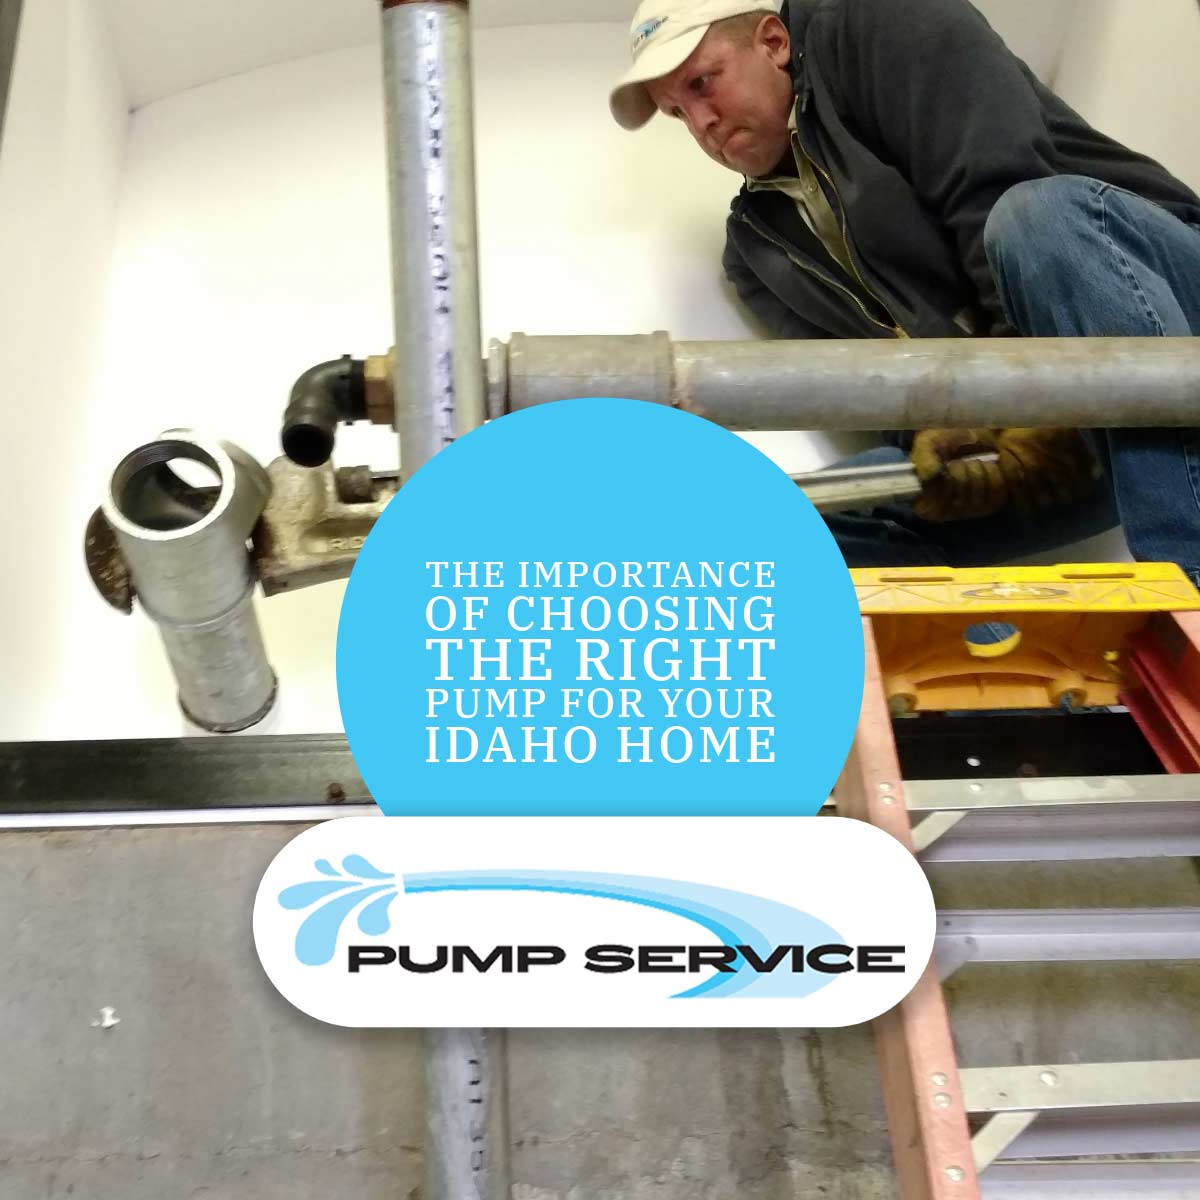 The Importance of Choosing the Right Pump for Your Idaho Home